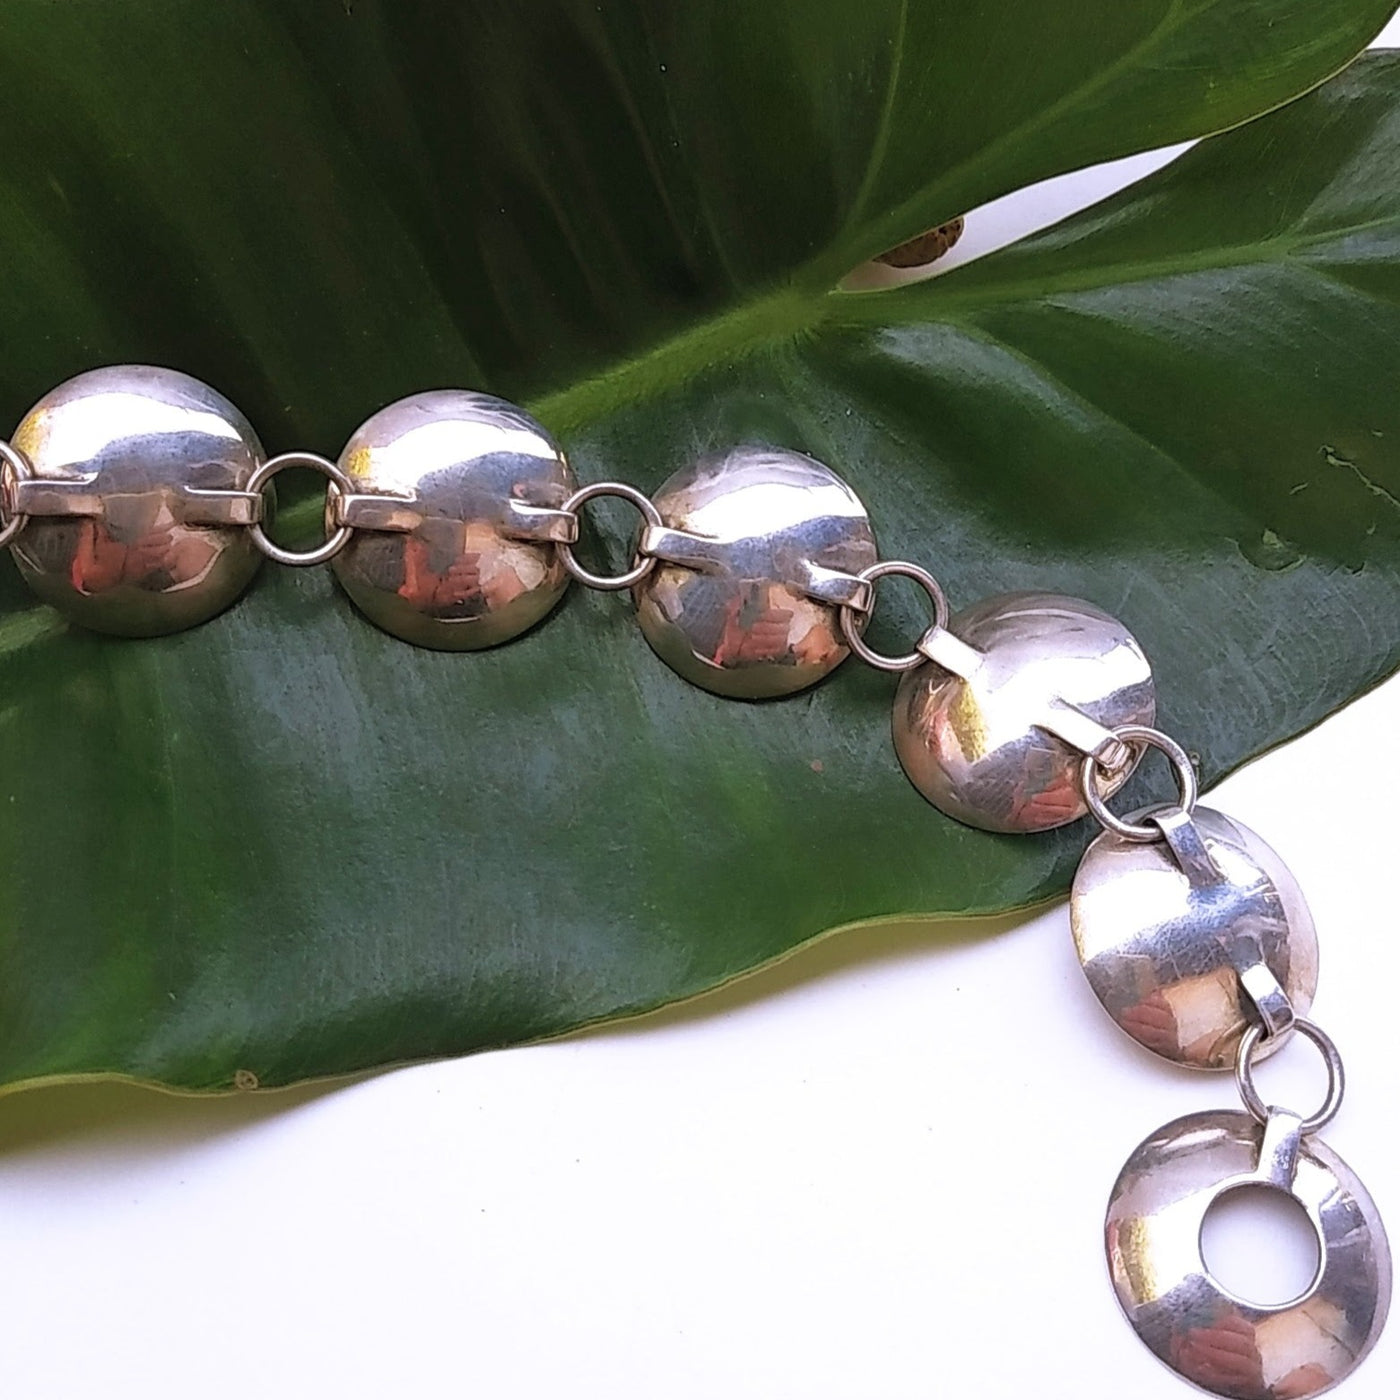 "Lilly Pads" 9" Bracelet - Pearls, Sterling